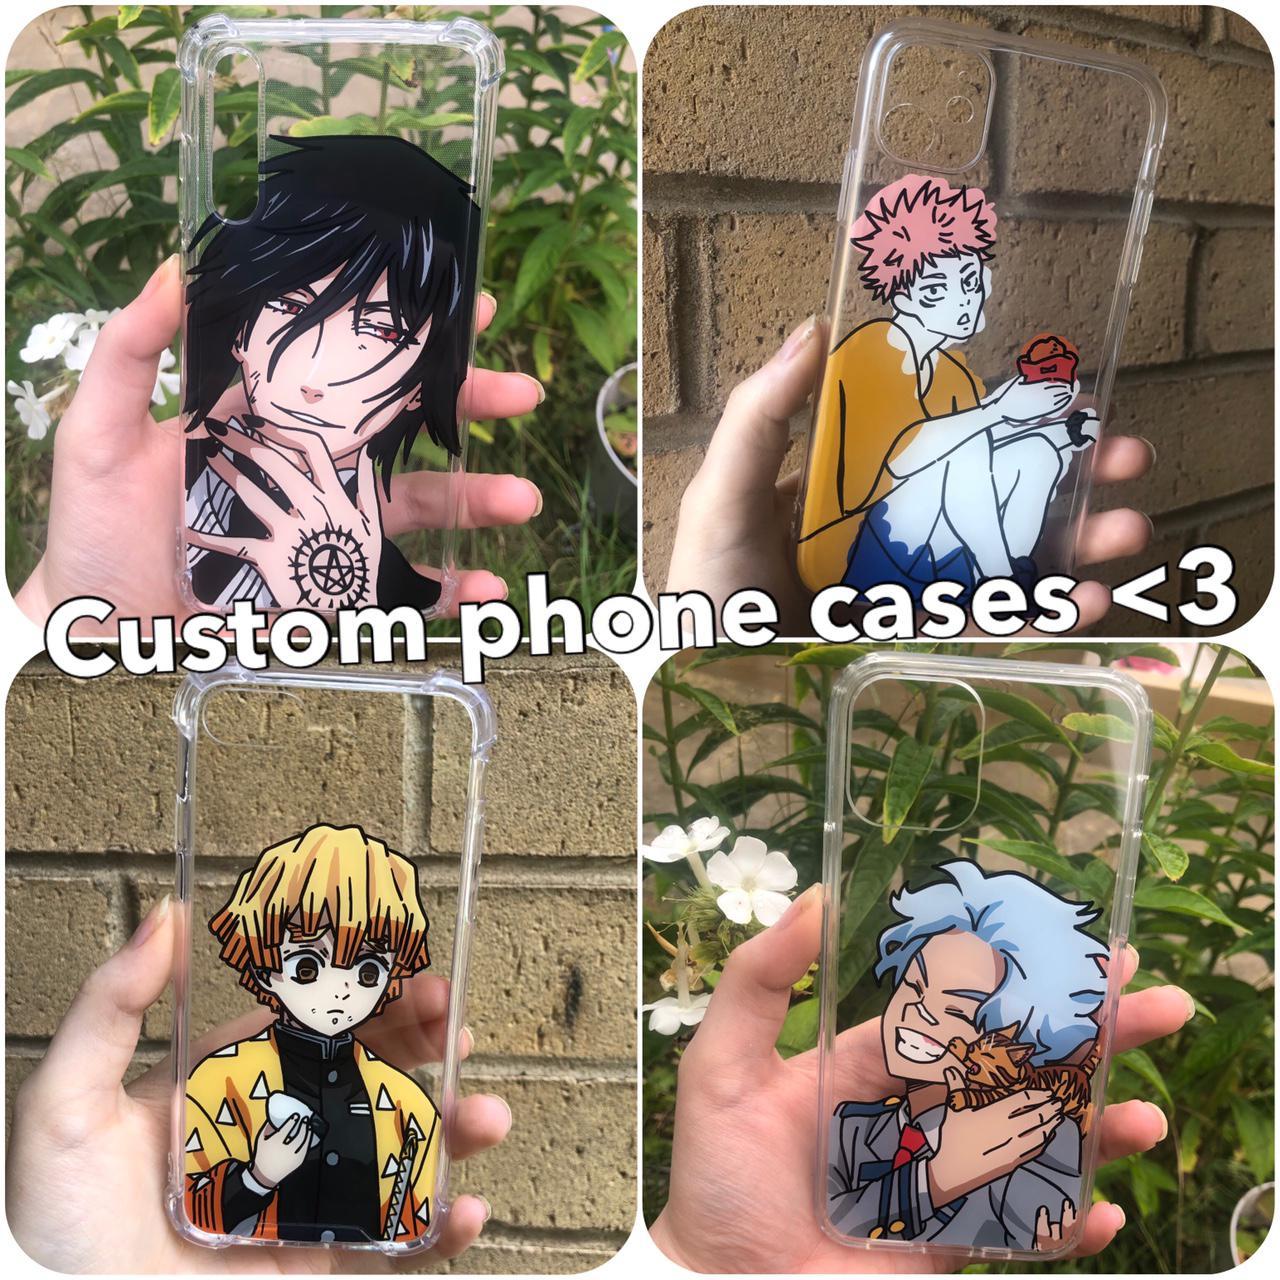 Aggregate 81+ best anime phone cases - awesomeenglish.edu.vn